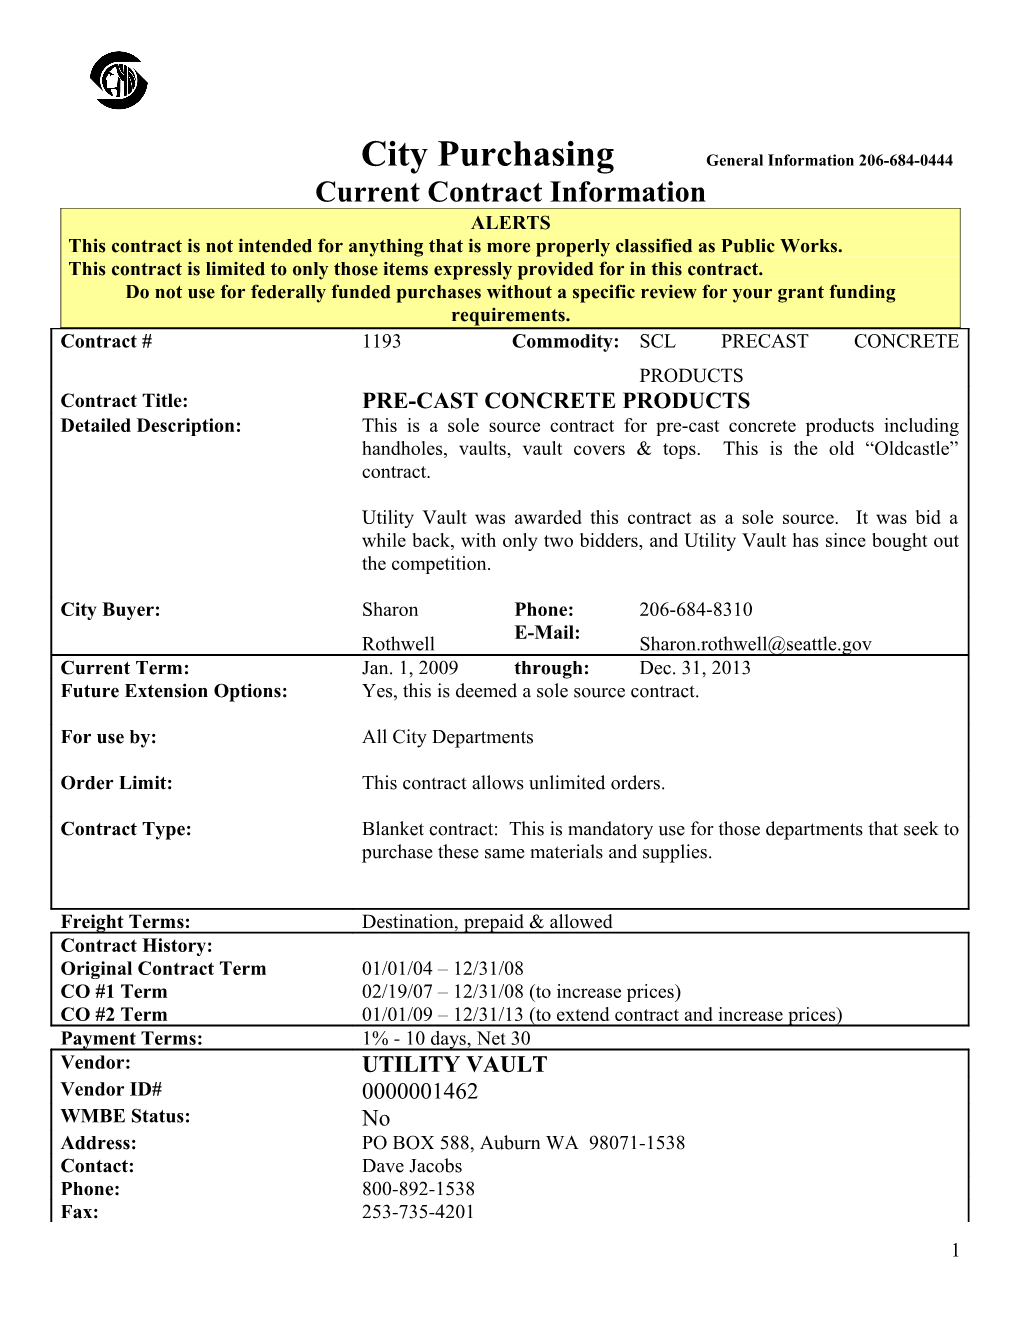 Current Contract Information Form s19